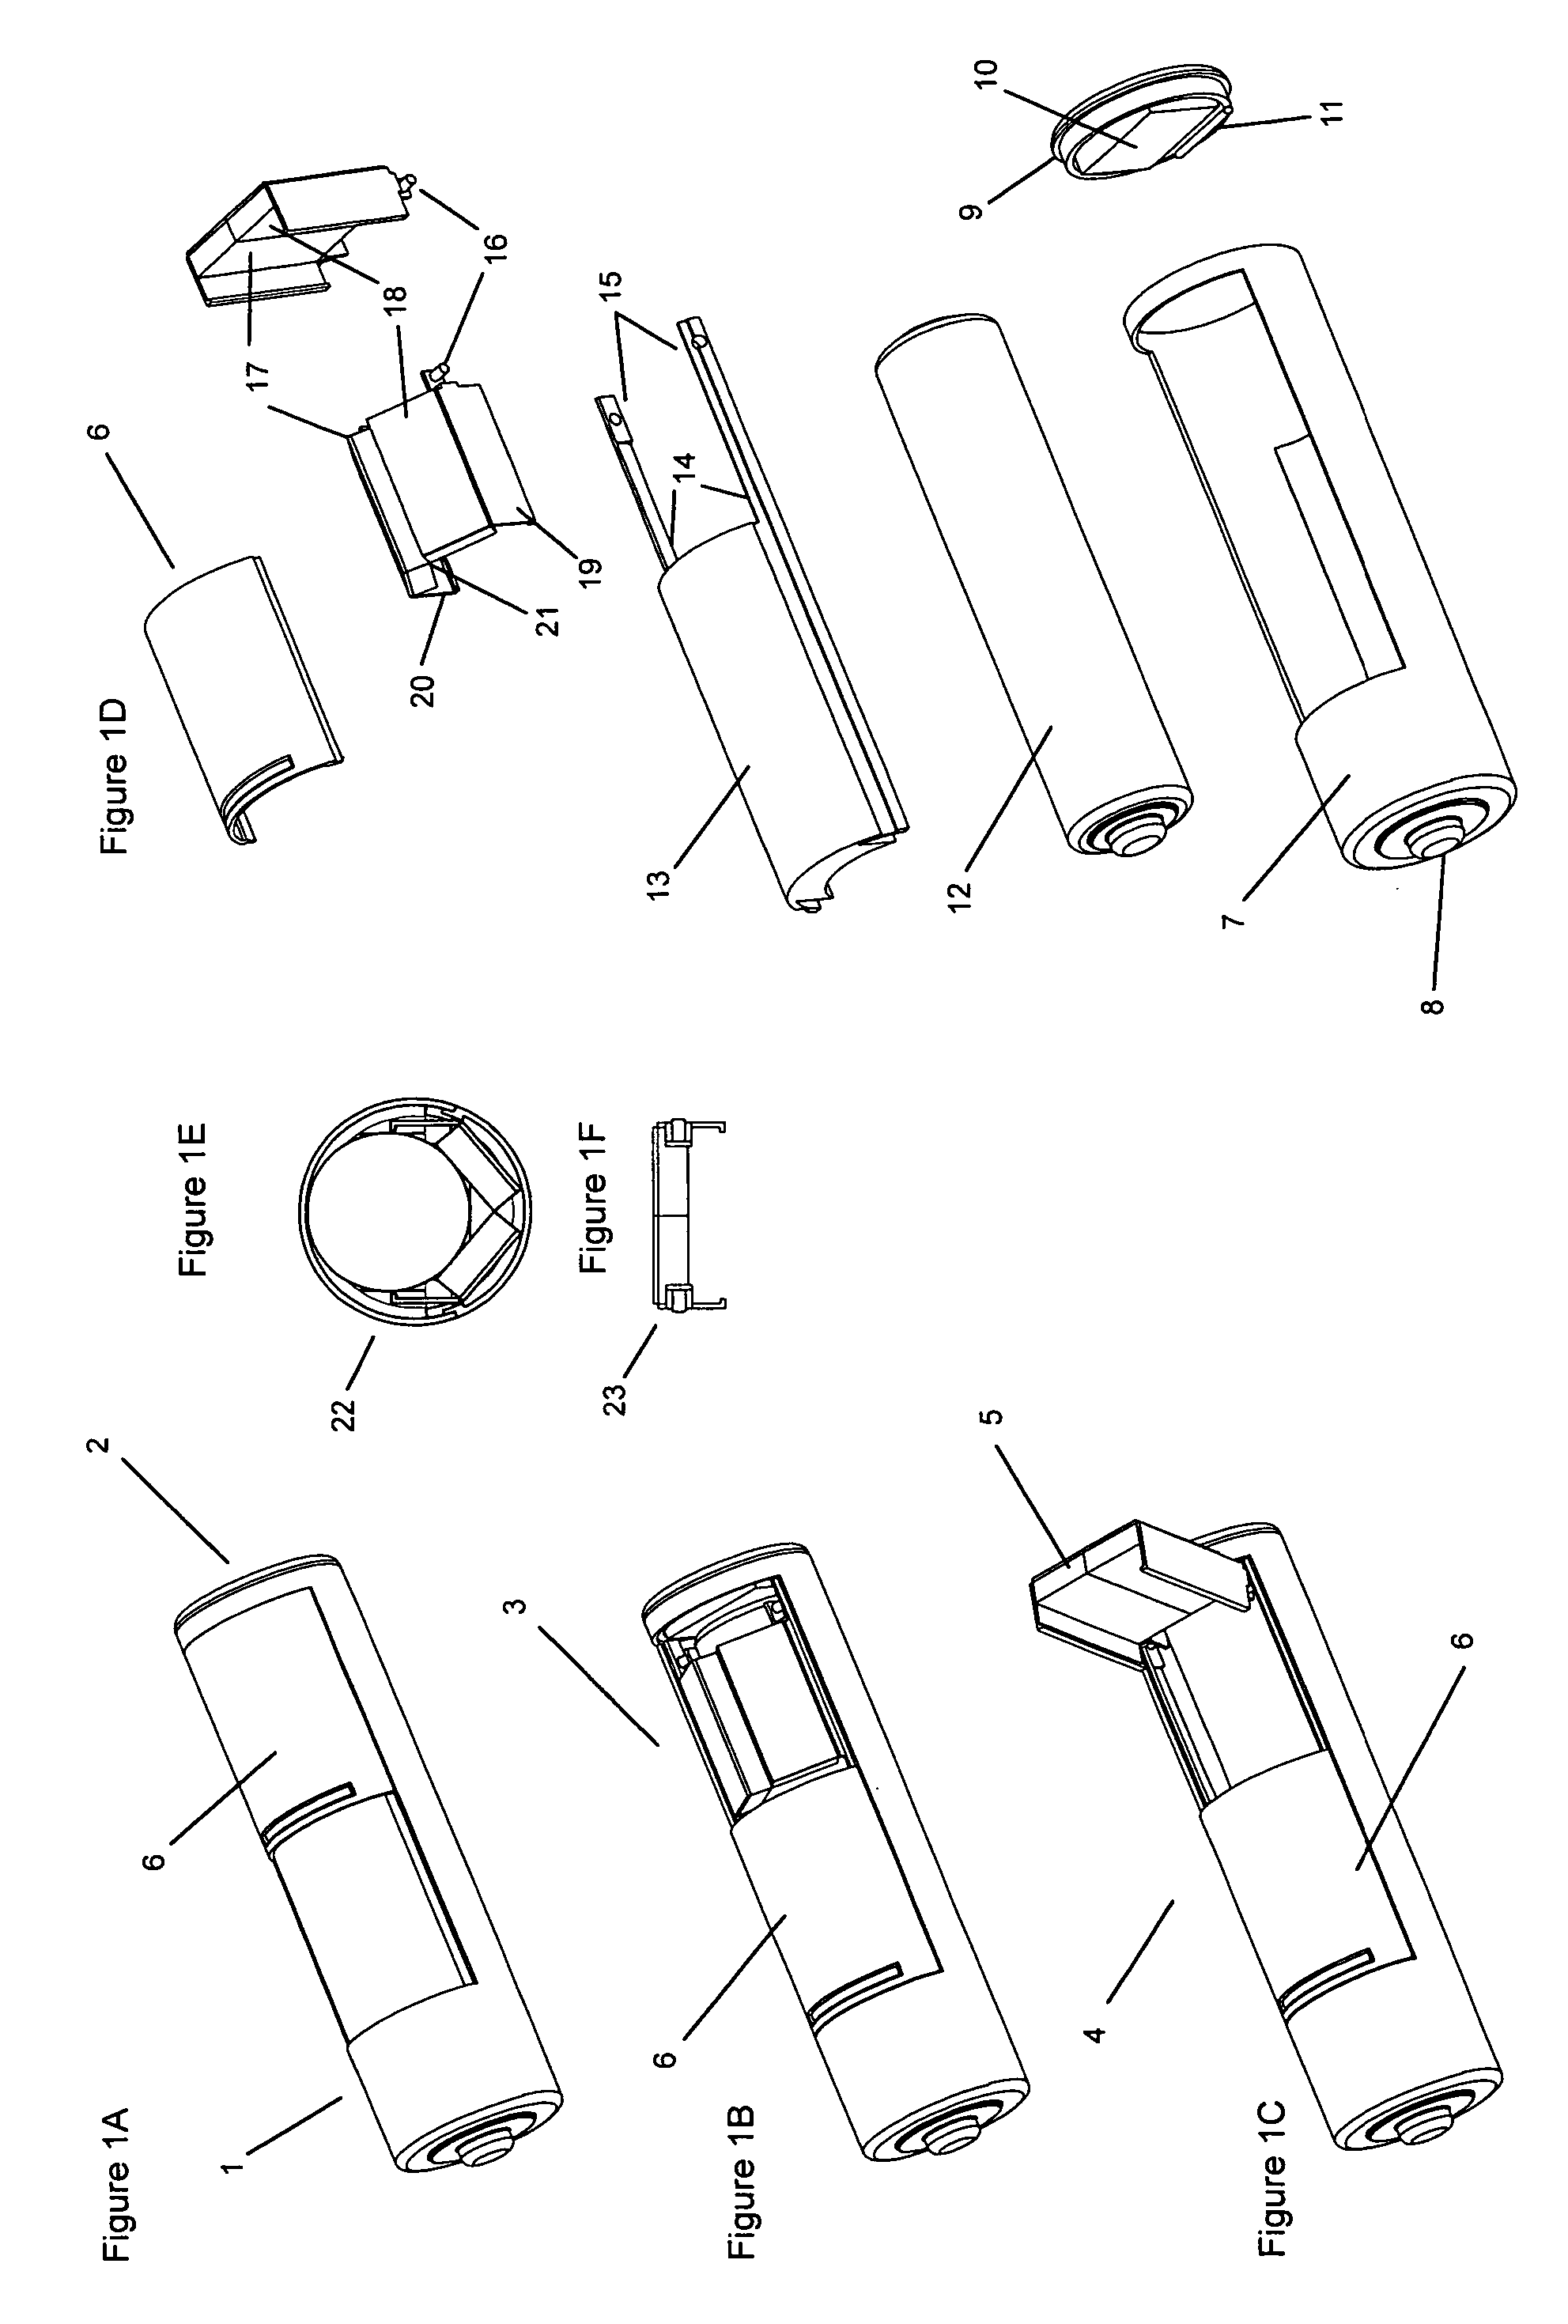 Rechargeable battery assembly having a data and power connector plug